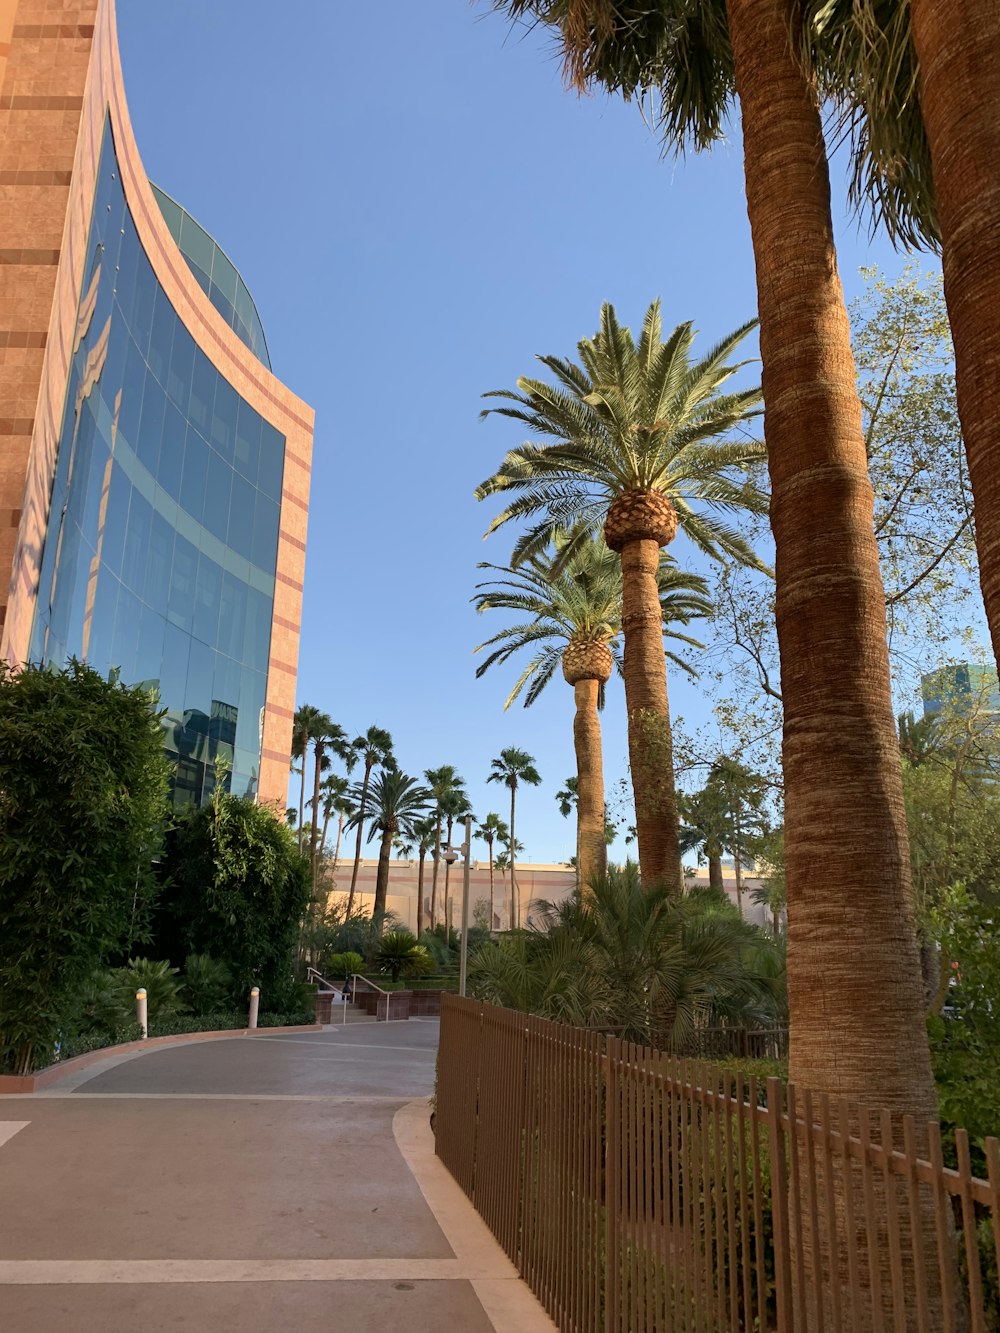 blue and brown glass walled building near palm trees and green field beside pathway under blue skies